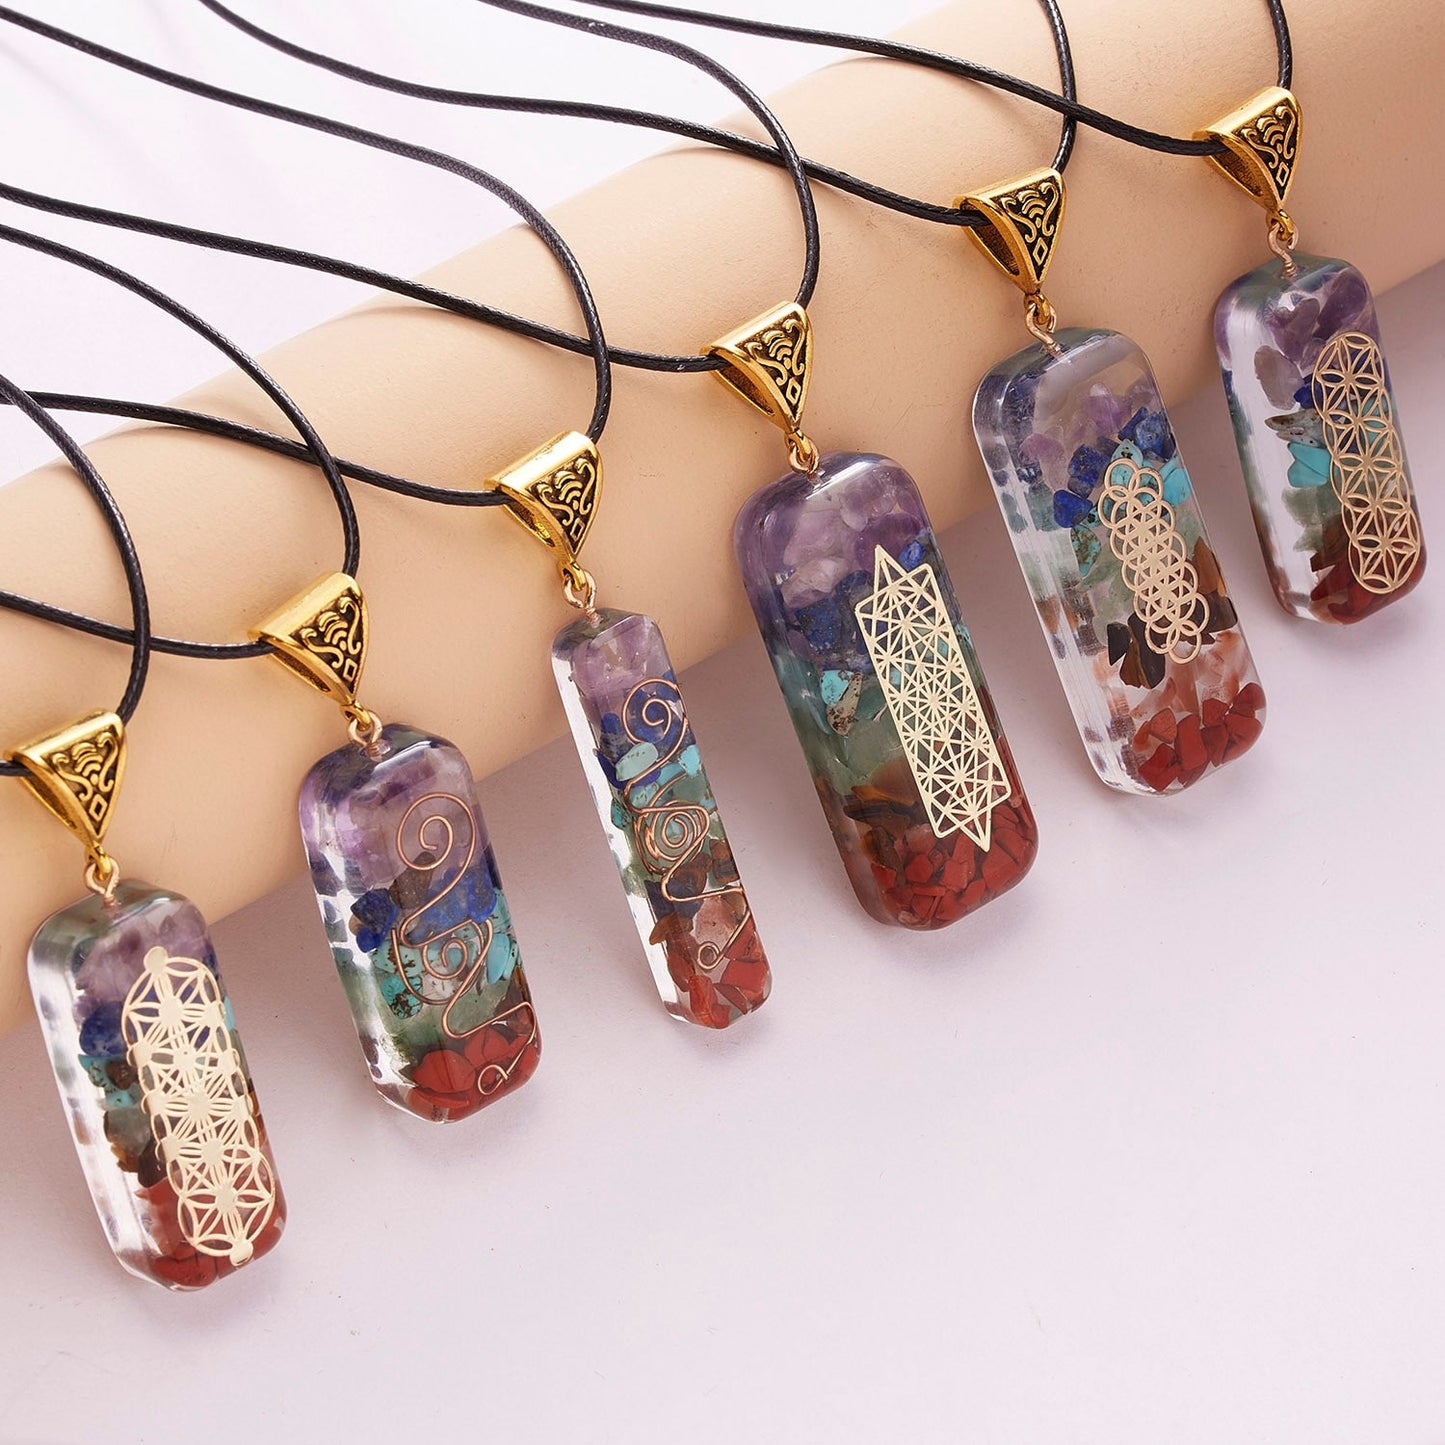 Orgonite Natural Stone Pendant Rope Chain Necklace Meditation Jewelry-All10dollars.com